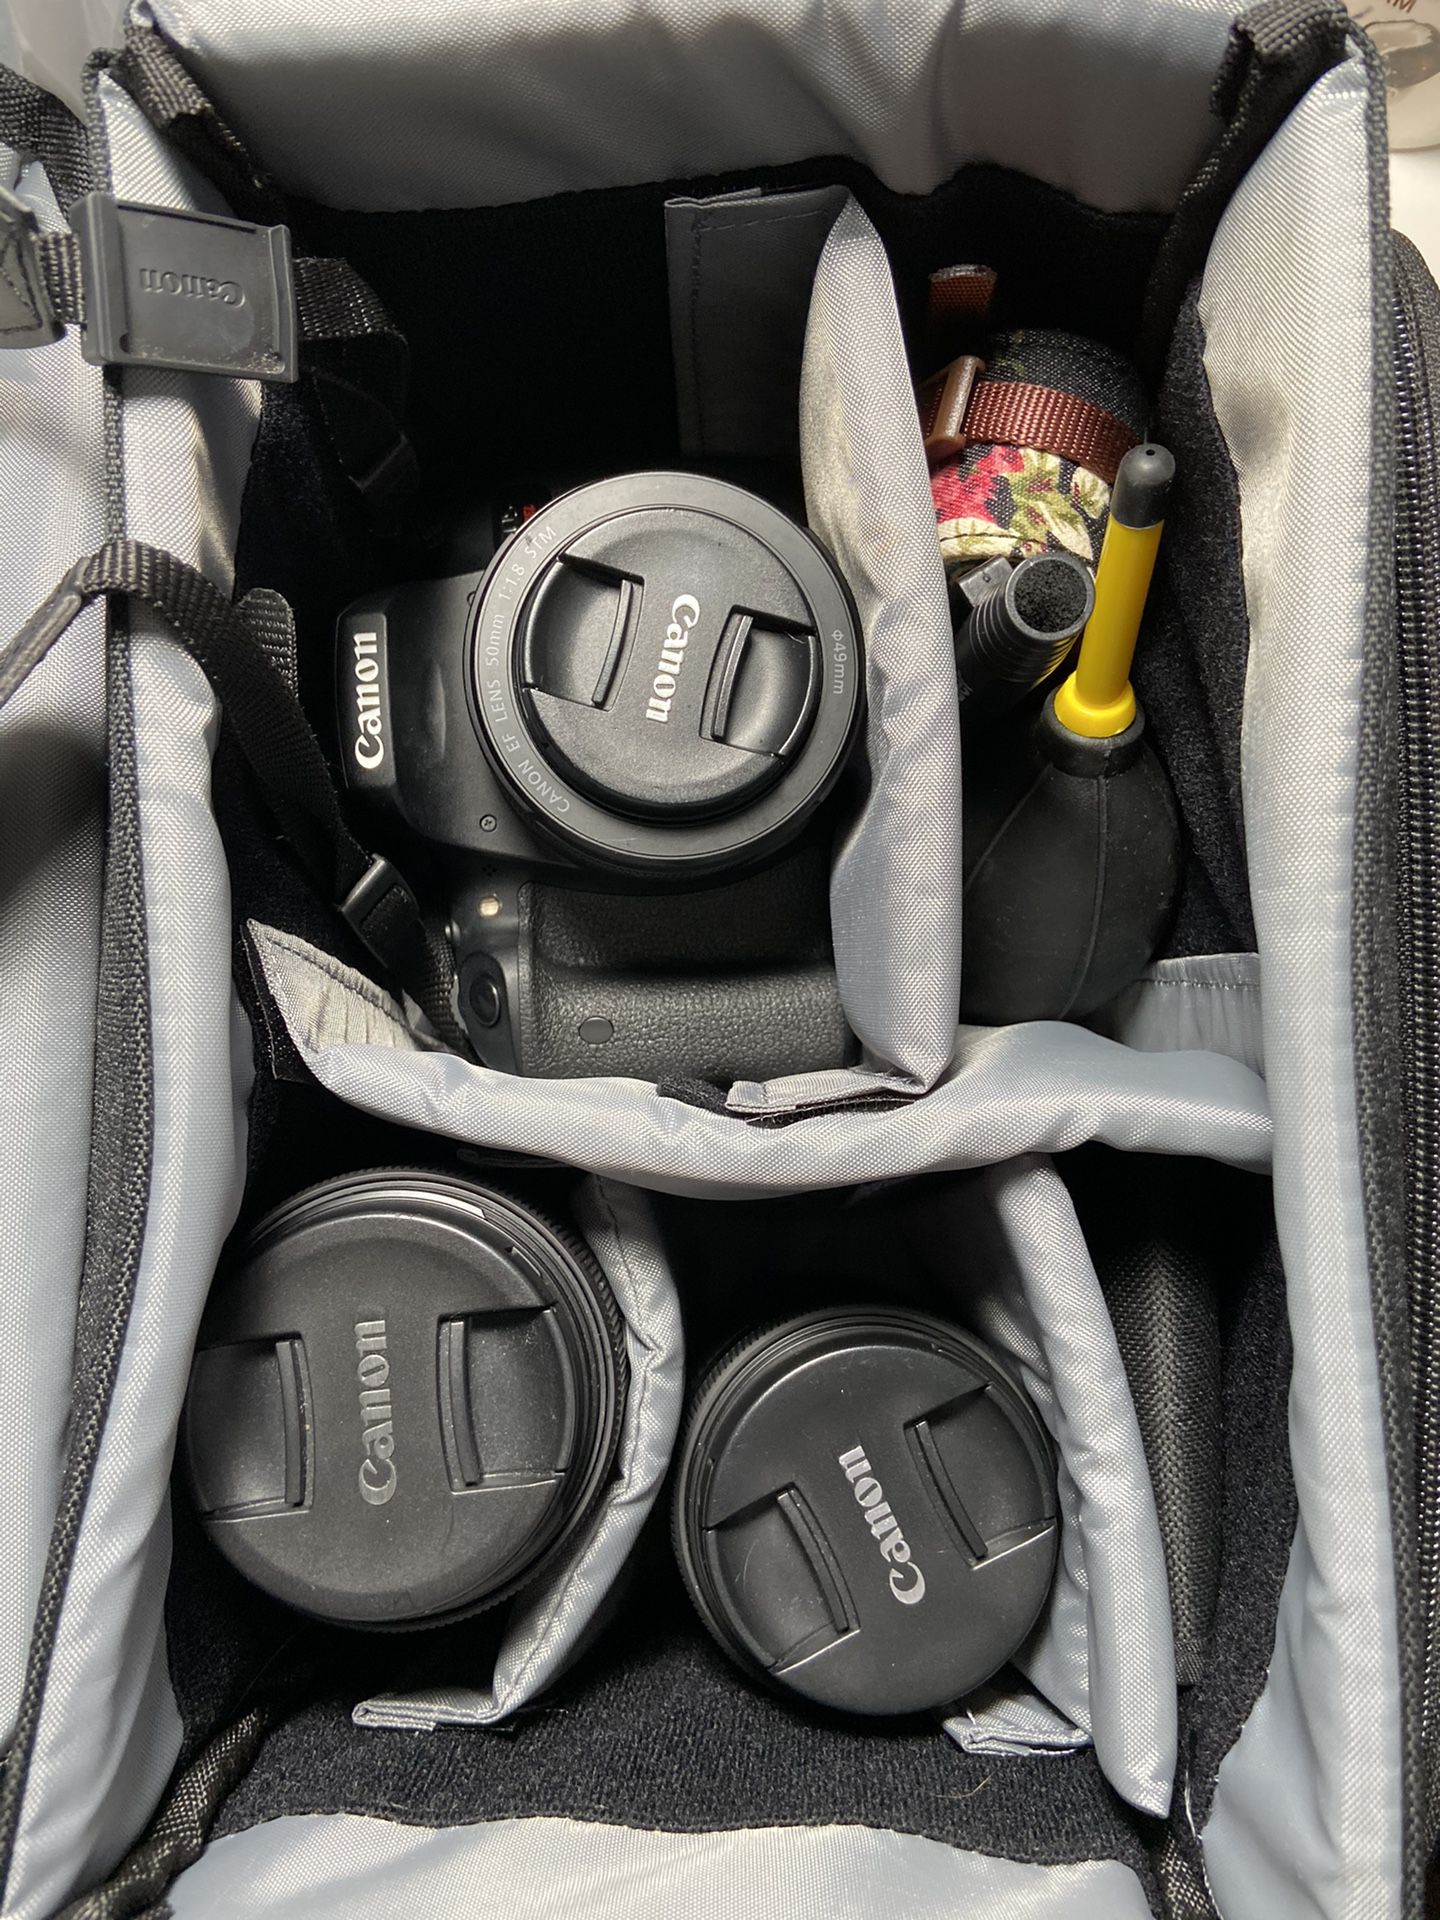 Canon T6i Rebel- 3 lenses and case